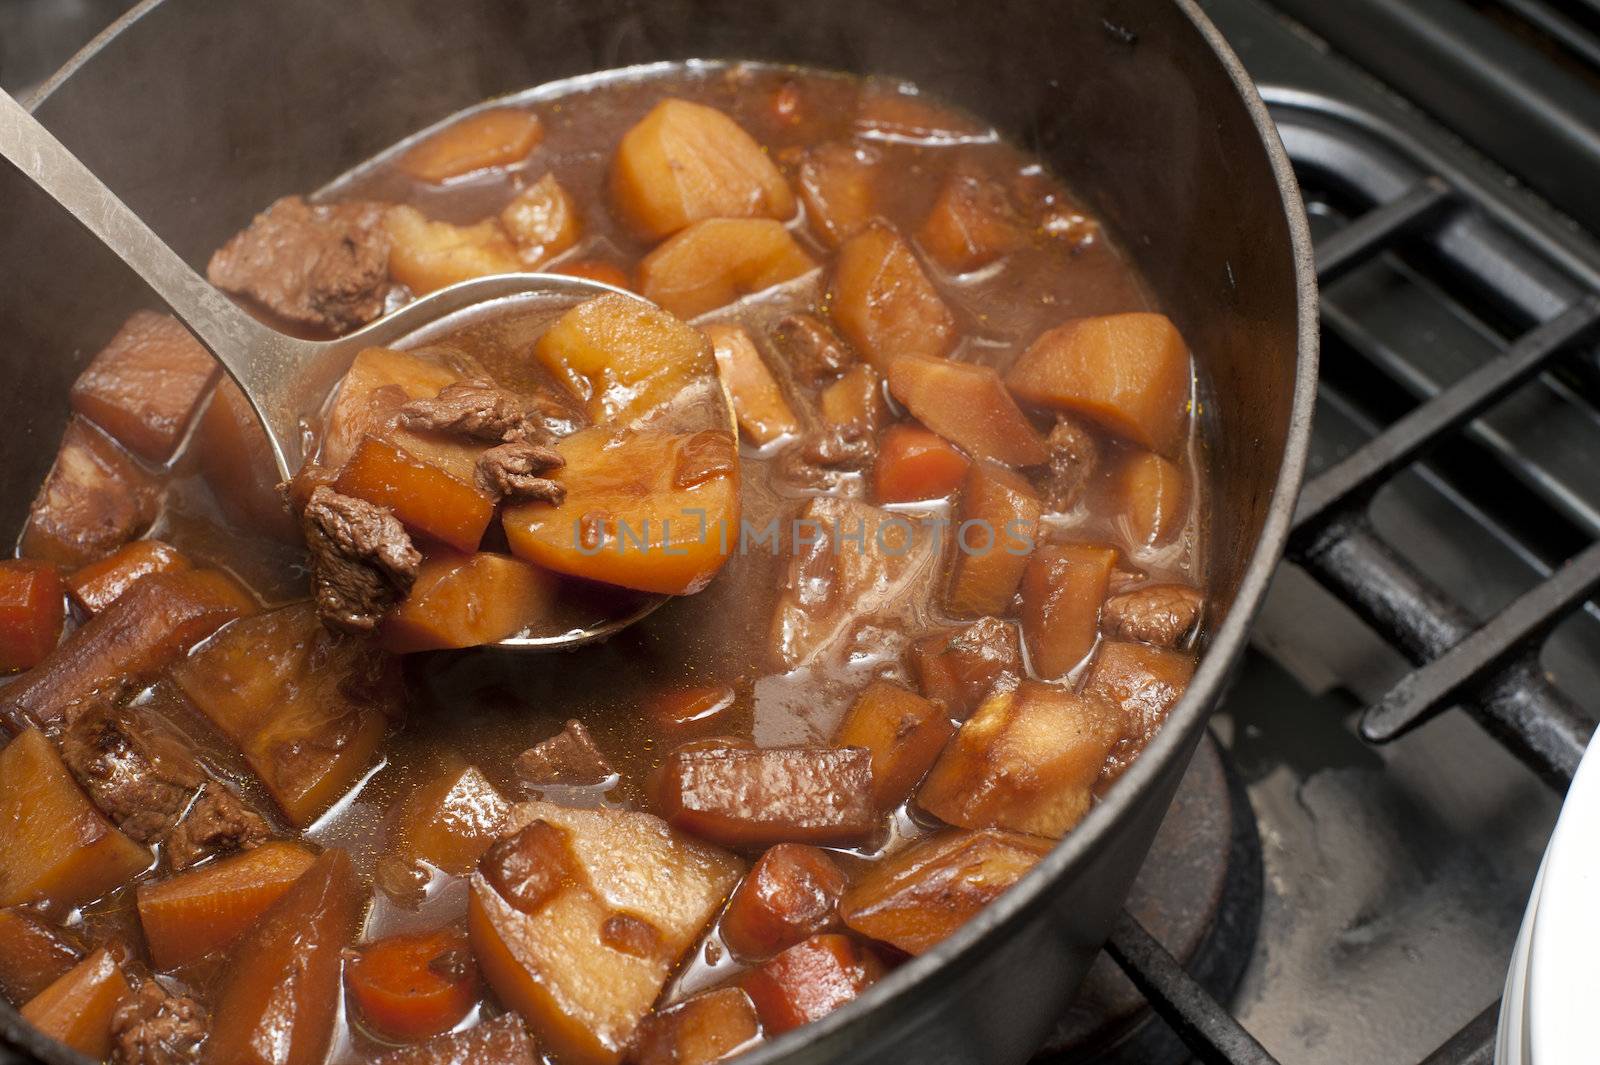 Delicious beef stew cooking in a pot in a rich gravy with potatoes and carrots for a traditional Lancashire Hotpot